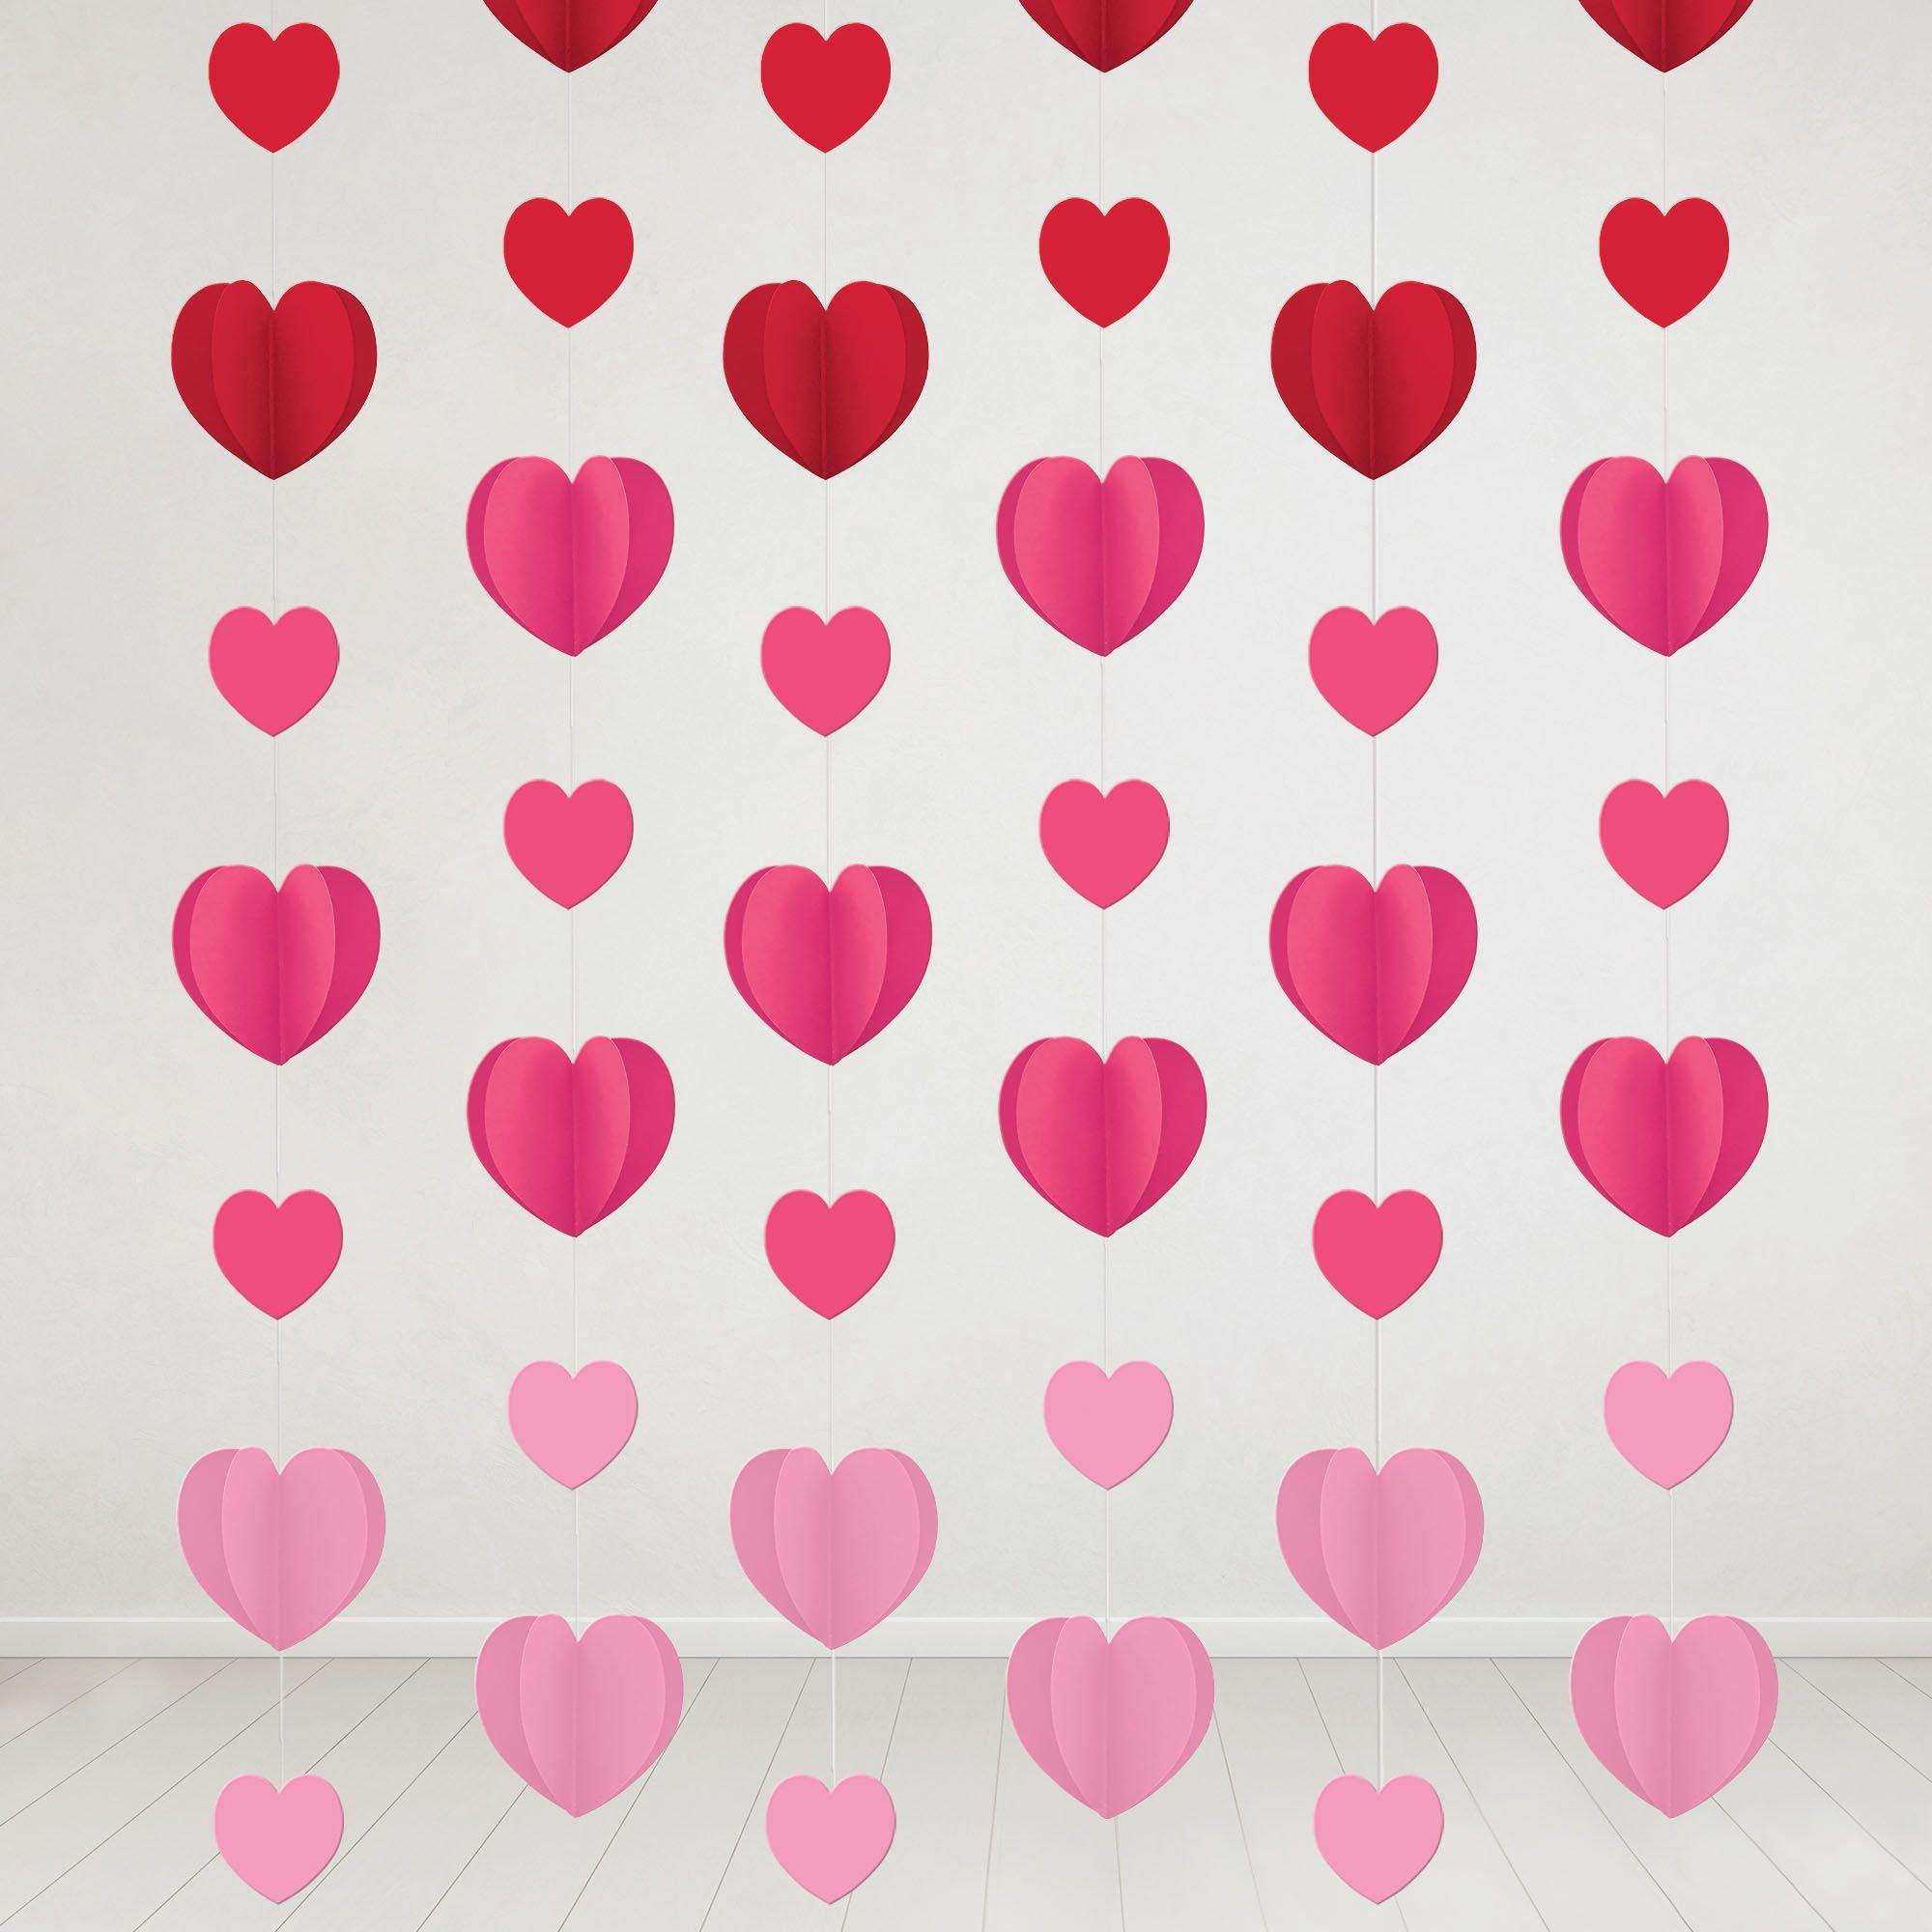 6 x 7ft Red Heart String Valentines Day Decorations Engagement Wedding  Party NEW, 25 - Harris Teeter